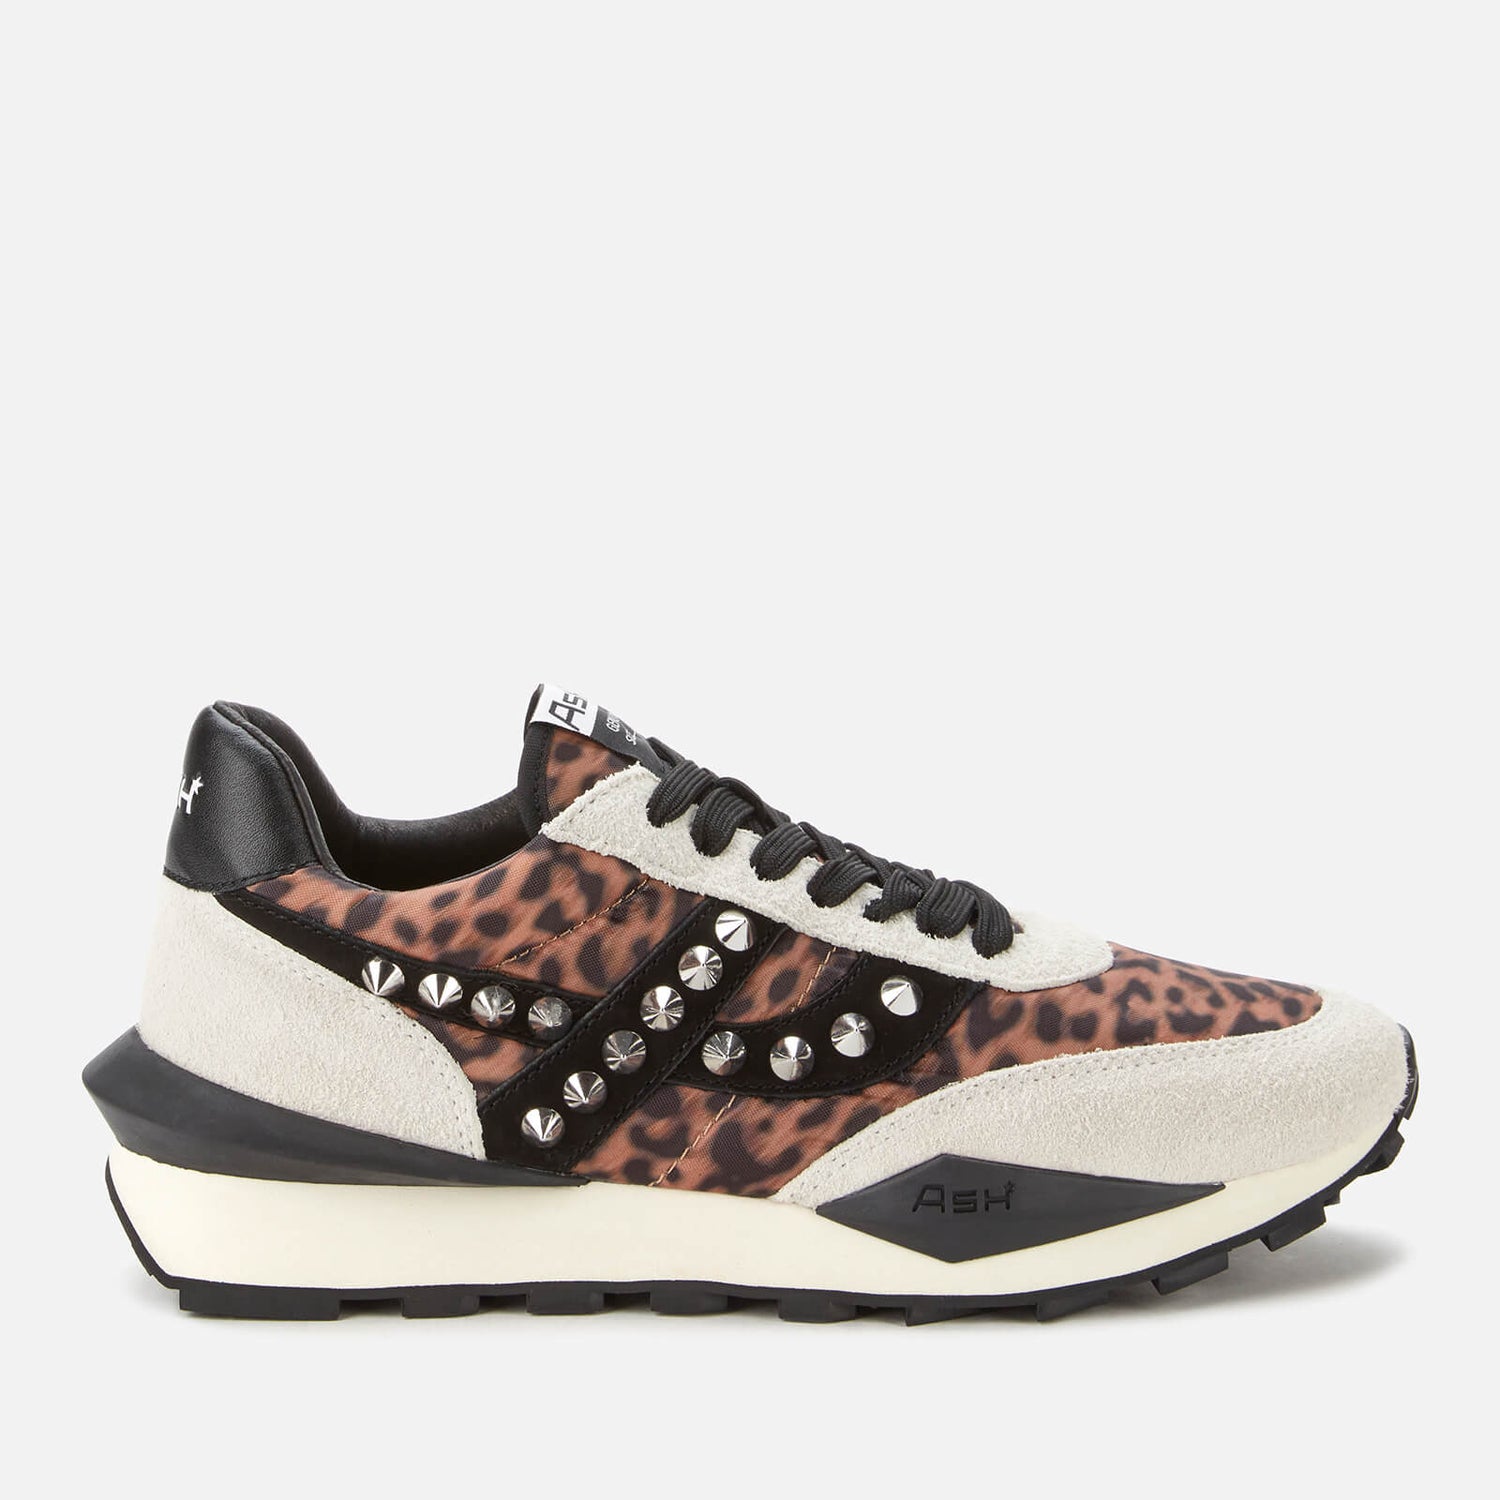 Ash Women's Spider Studs Sustainable Running Style Trainers - Off White/Beige/Black - UK 5